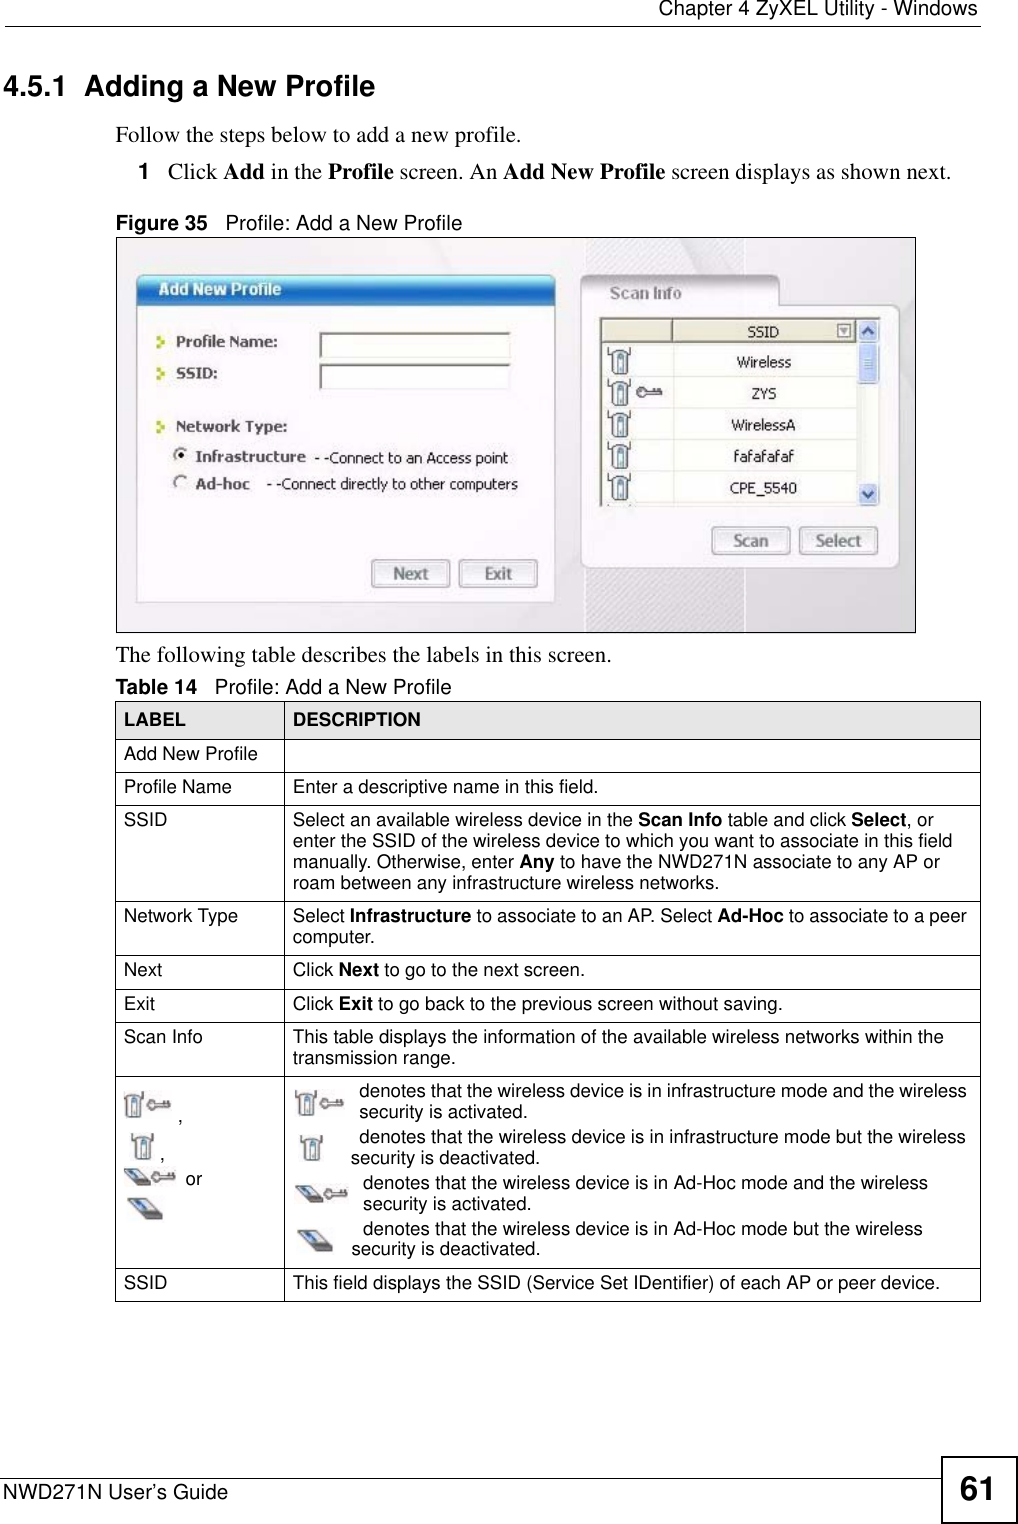  Chapter 4 ZyXEL Utility - WindowsNWD271N User’s Guide 614.5.1  Adding a New ProfileFollow the steps below to add a new profile.1Click Add in the Profile screen. An Add New Profile screen displays as shown next. Figure 35   Profile: Add a New Profile The following table describes the labels in this screen. Table 14   Profile: Add a New Profile LABEL DESCRIPTIONAdd New ProfileProfile Name Enter a descriptive name in this field.SSID Select an available wireless device in the Scan Info table and click Select, or enter the SSID of the wireless device to which you want to associate in this field manually. Otherwise, enter Any to have the NWD271N associate to any AP or roam between any infrastructure wireless networks.Network Type Select Infrastructure to associate to an AP. Select Ad-Hoc to associate to a peer computer.Next Click Next to go to the next screen.Exit Click Exit to go back to the previous screen without saving.Scan Info This table displays the information of the available wireless networks within the transmission range.,, ordenotes that the wireless device is in infrastructure mode and the wireless security is activated.denotes that the wireless device is in infrastructure mode but the wireless security is deactivated.denotes that the wireless device is in Ad-Hoc mode and the wireless security is activated.denotes that the wireless device is in Ad-Hoc mode but the wireless security is deactivated.SSID This field displays the SSID (Service Set IDentifier) of each AP or peer device.